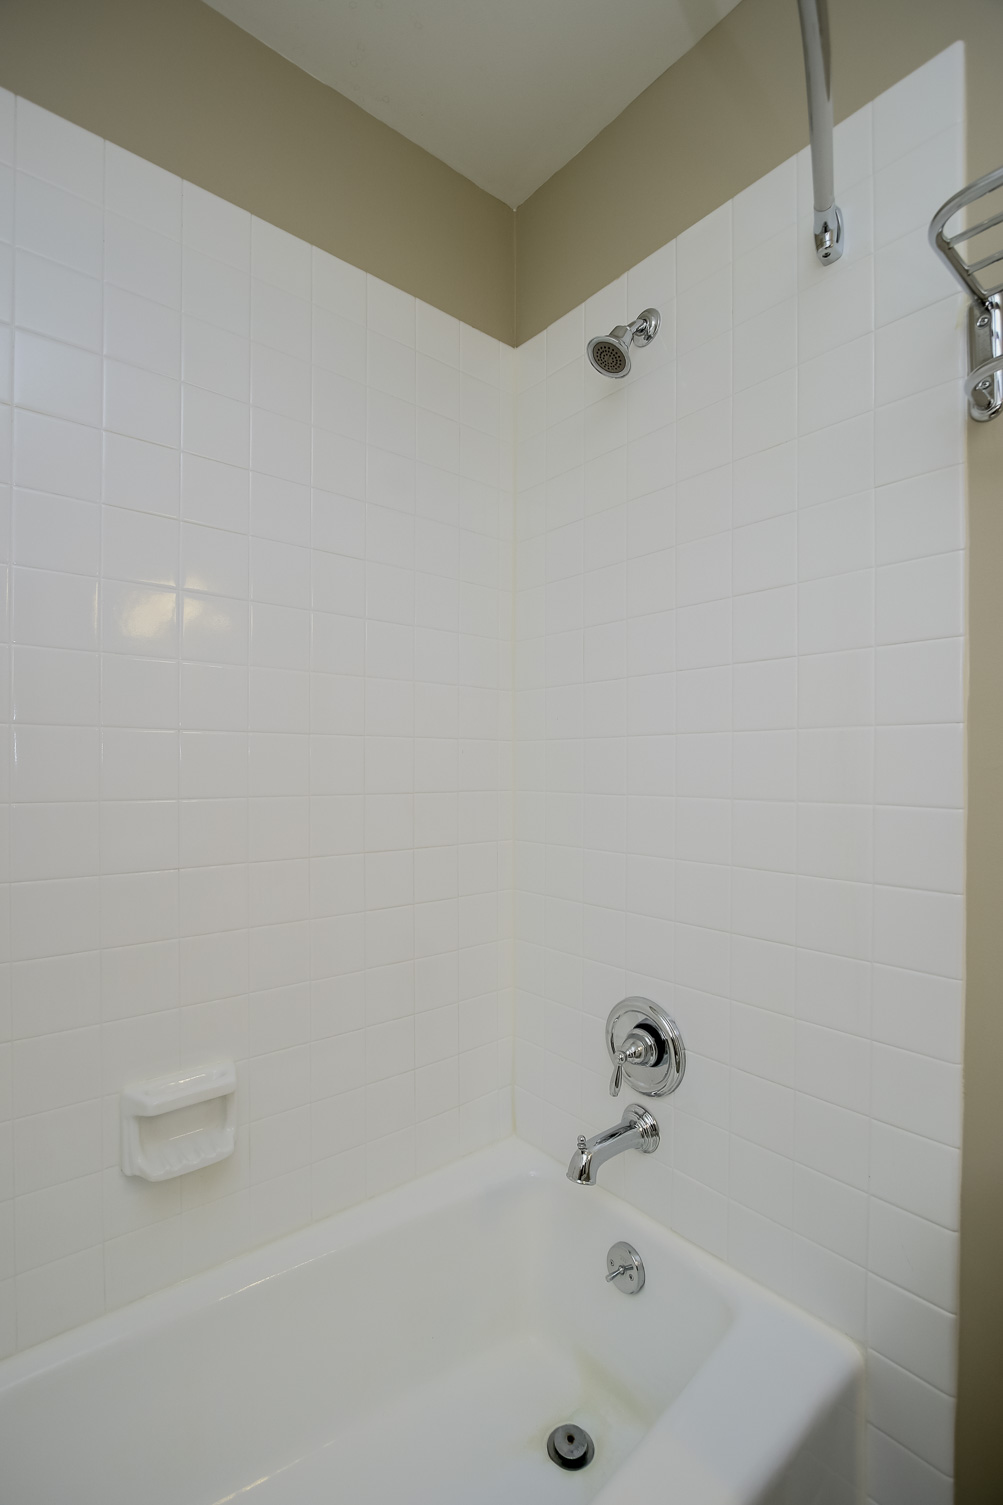 Large Soaking Tub In Master Bathroom with A Tile Surround